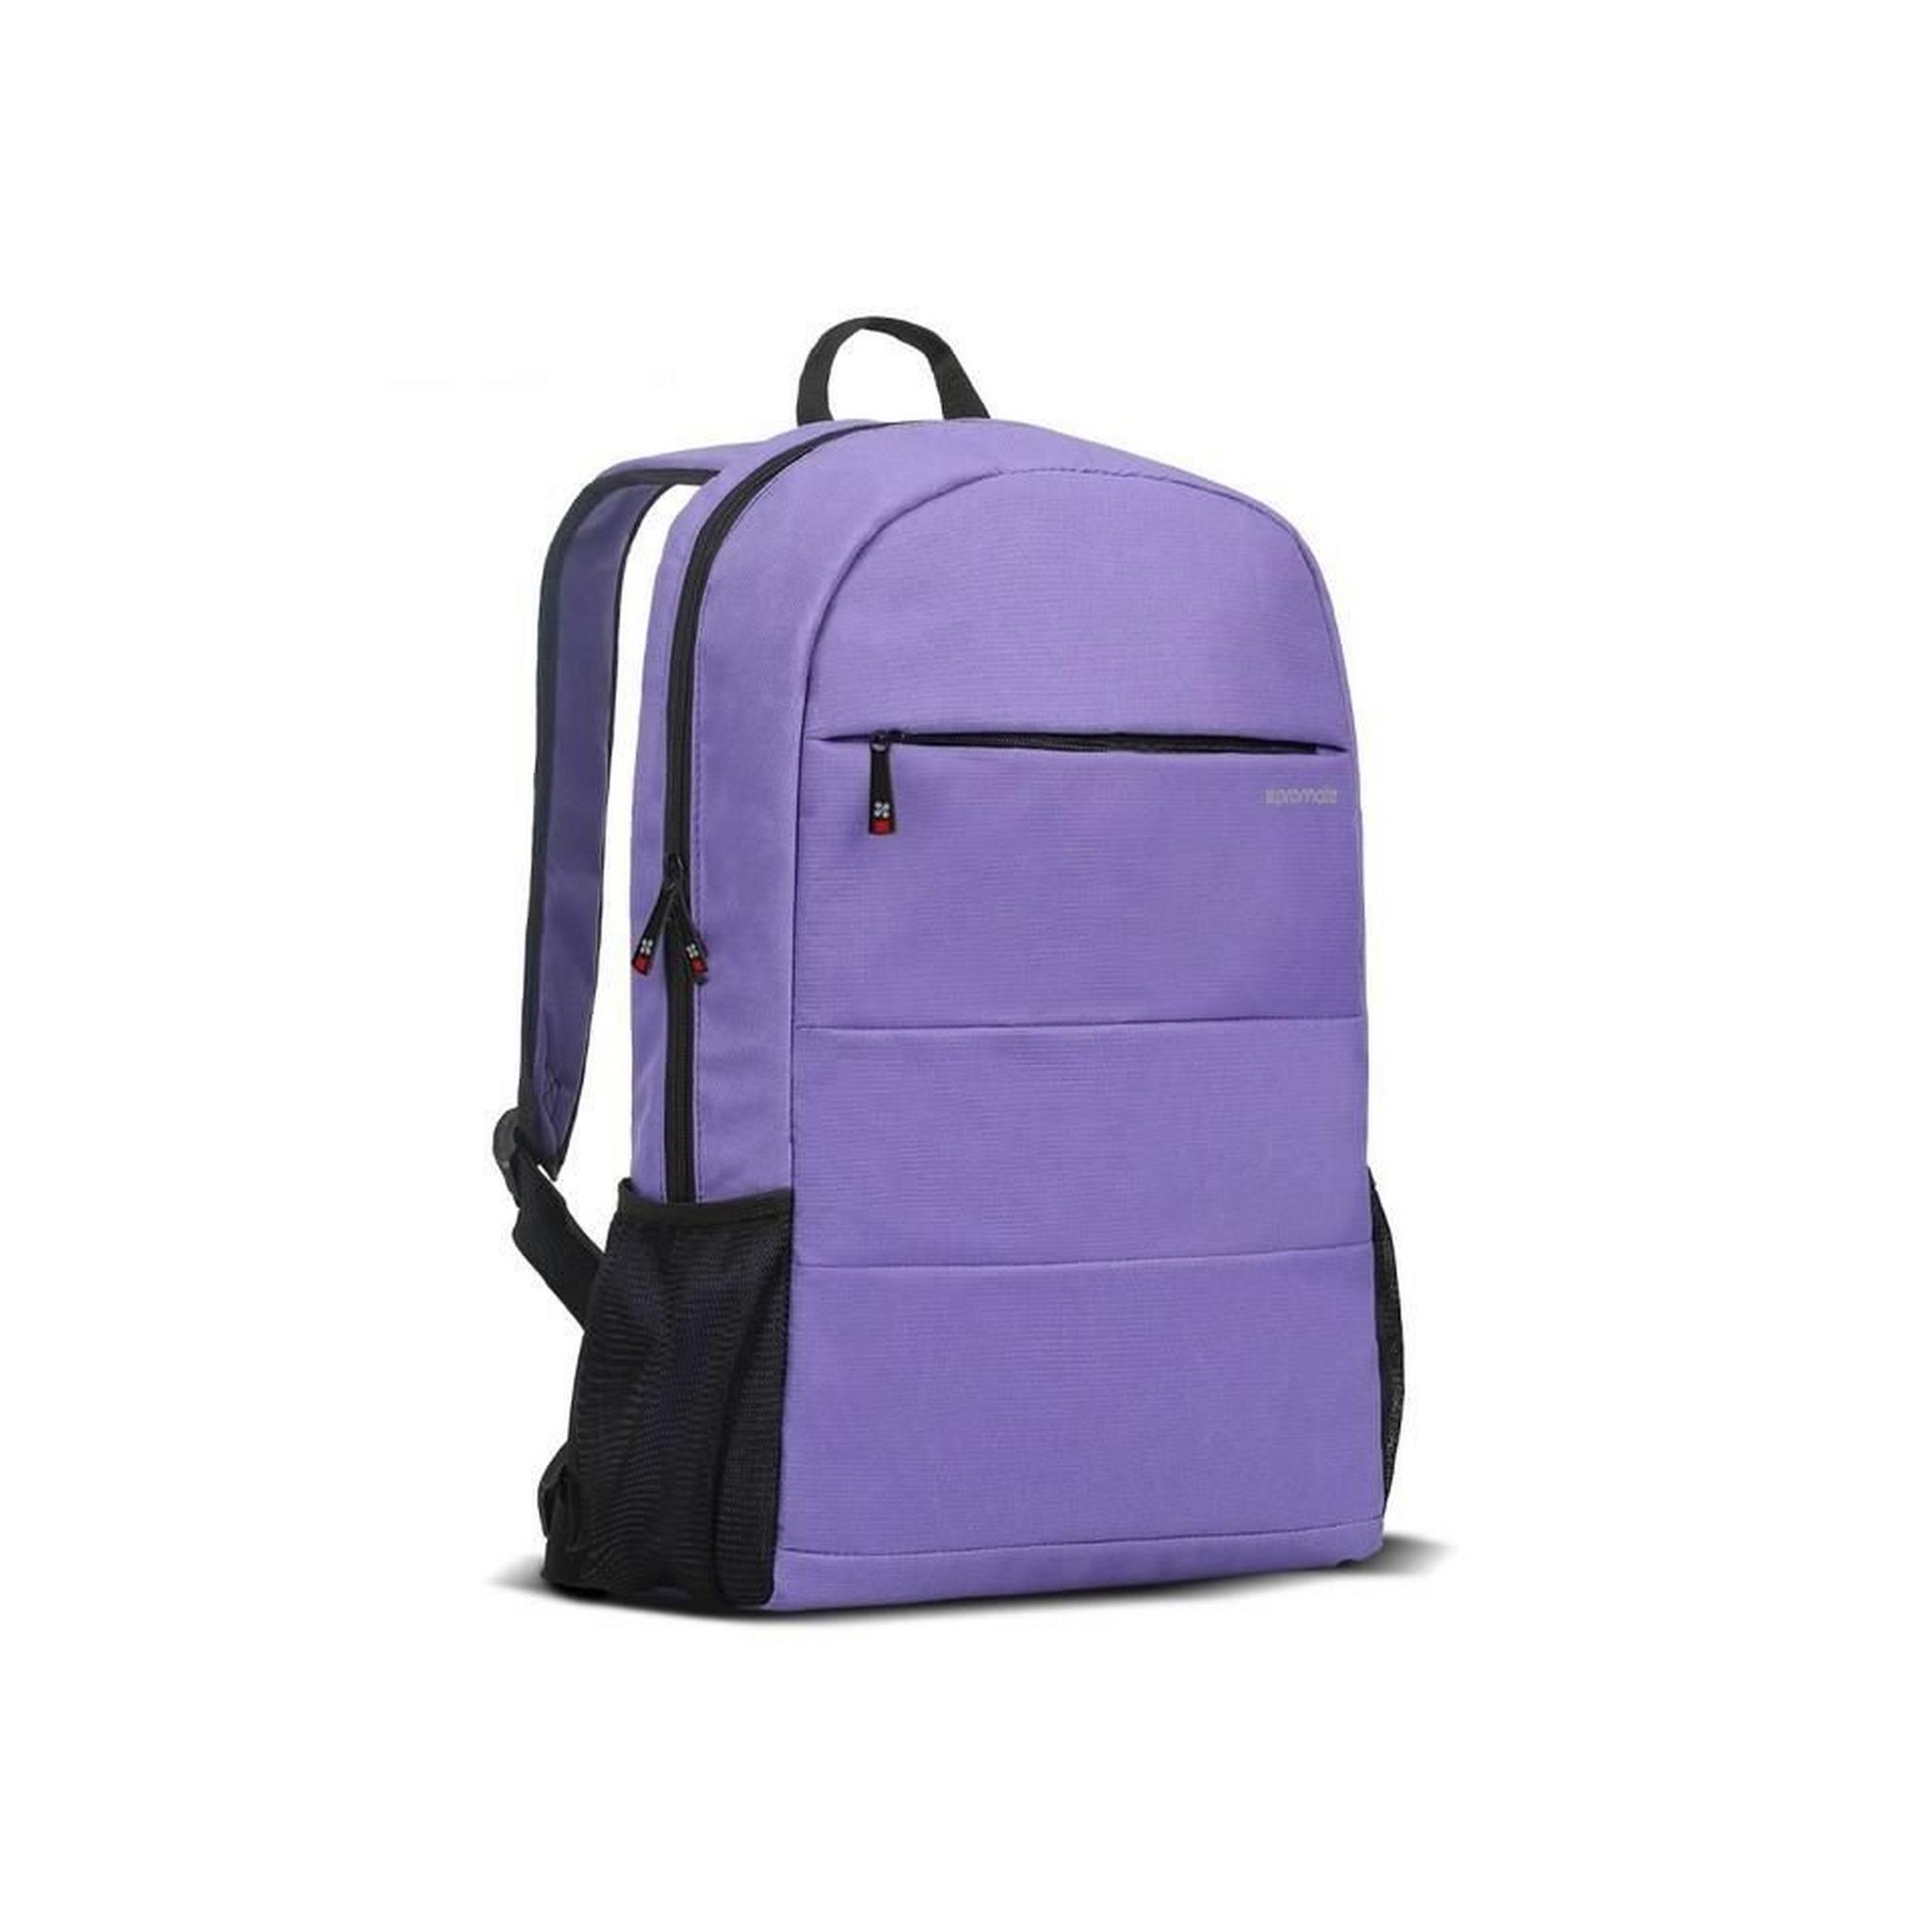 Promate Alpha Anti-Theft 15.6 Inches Laptop Backpack - Blue